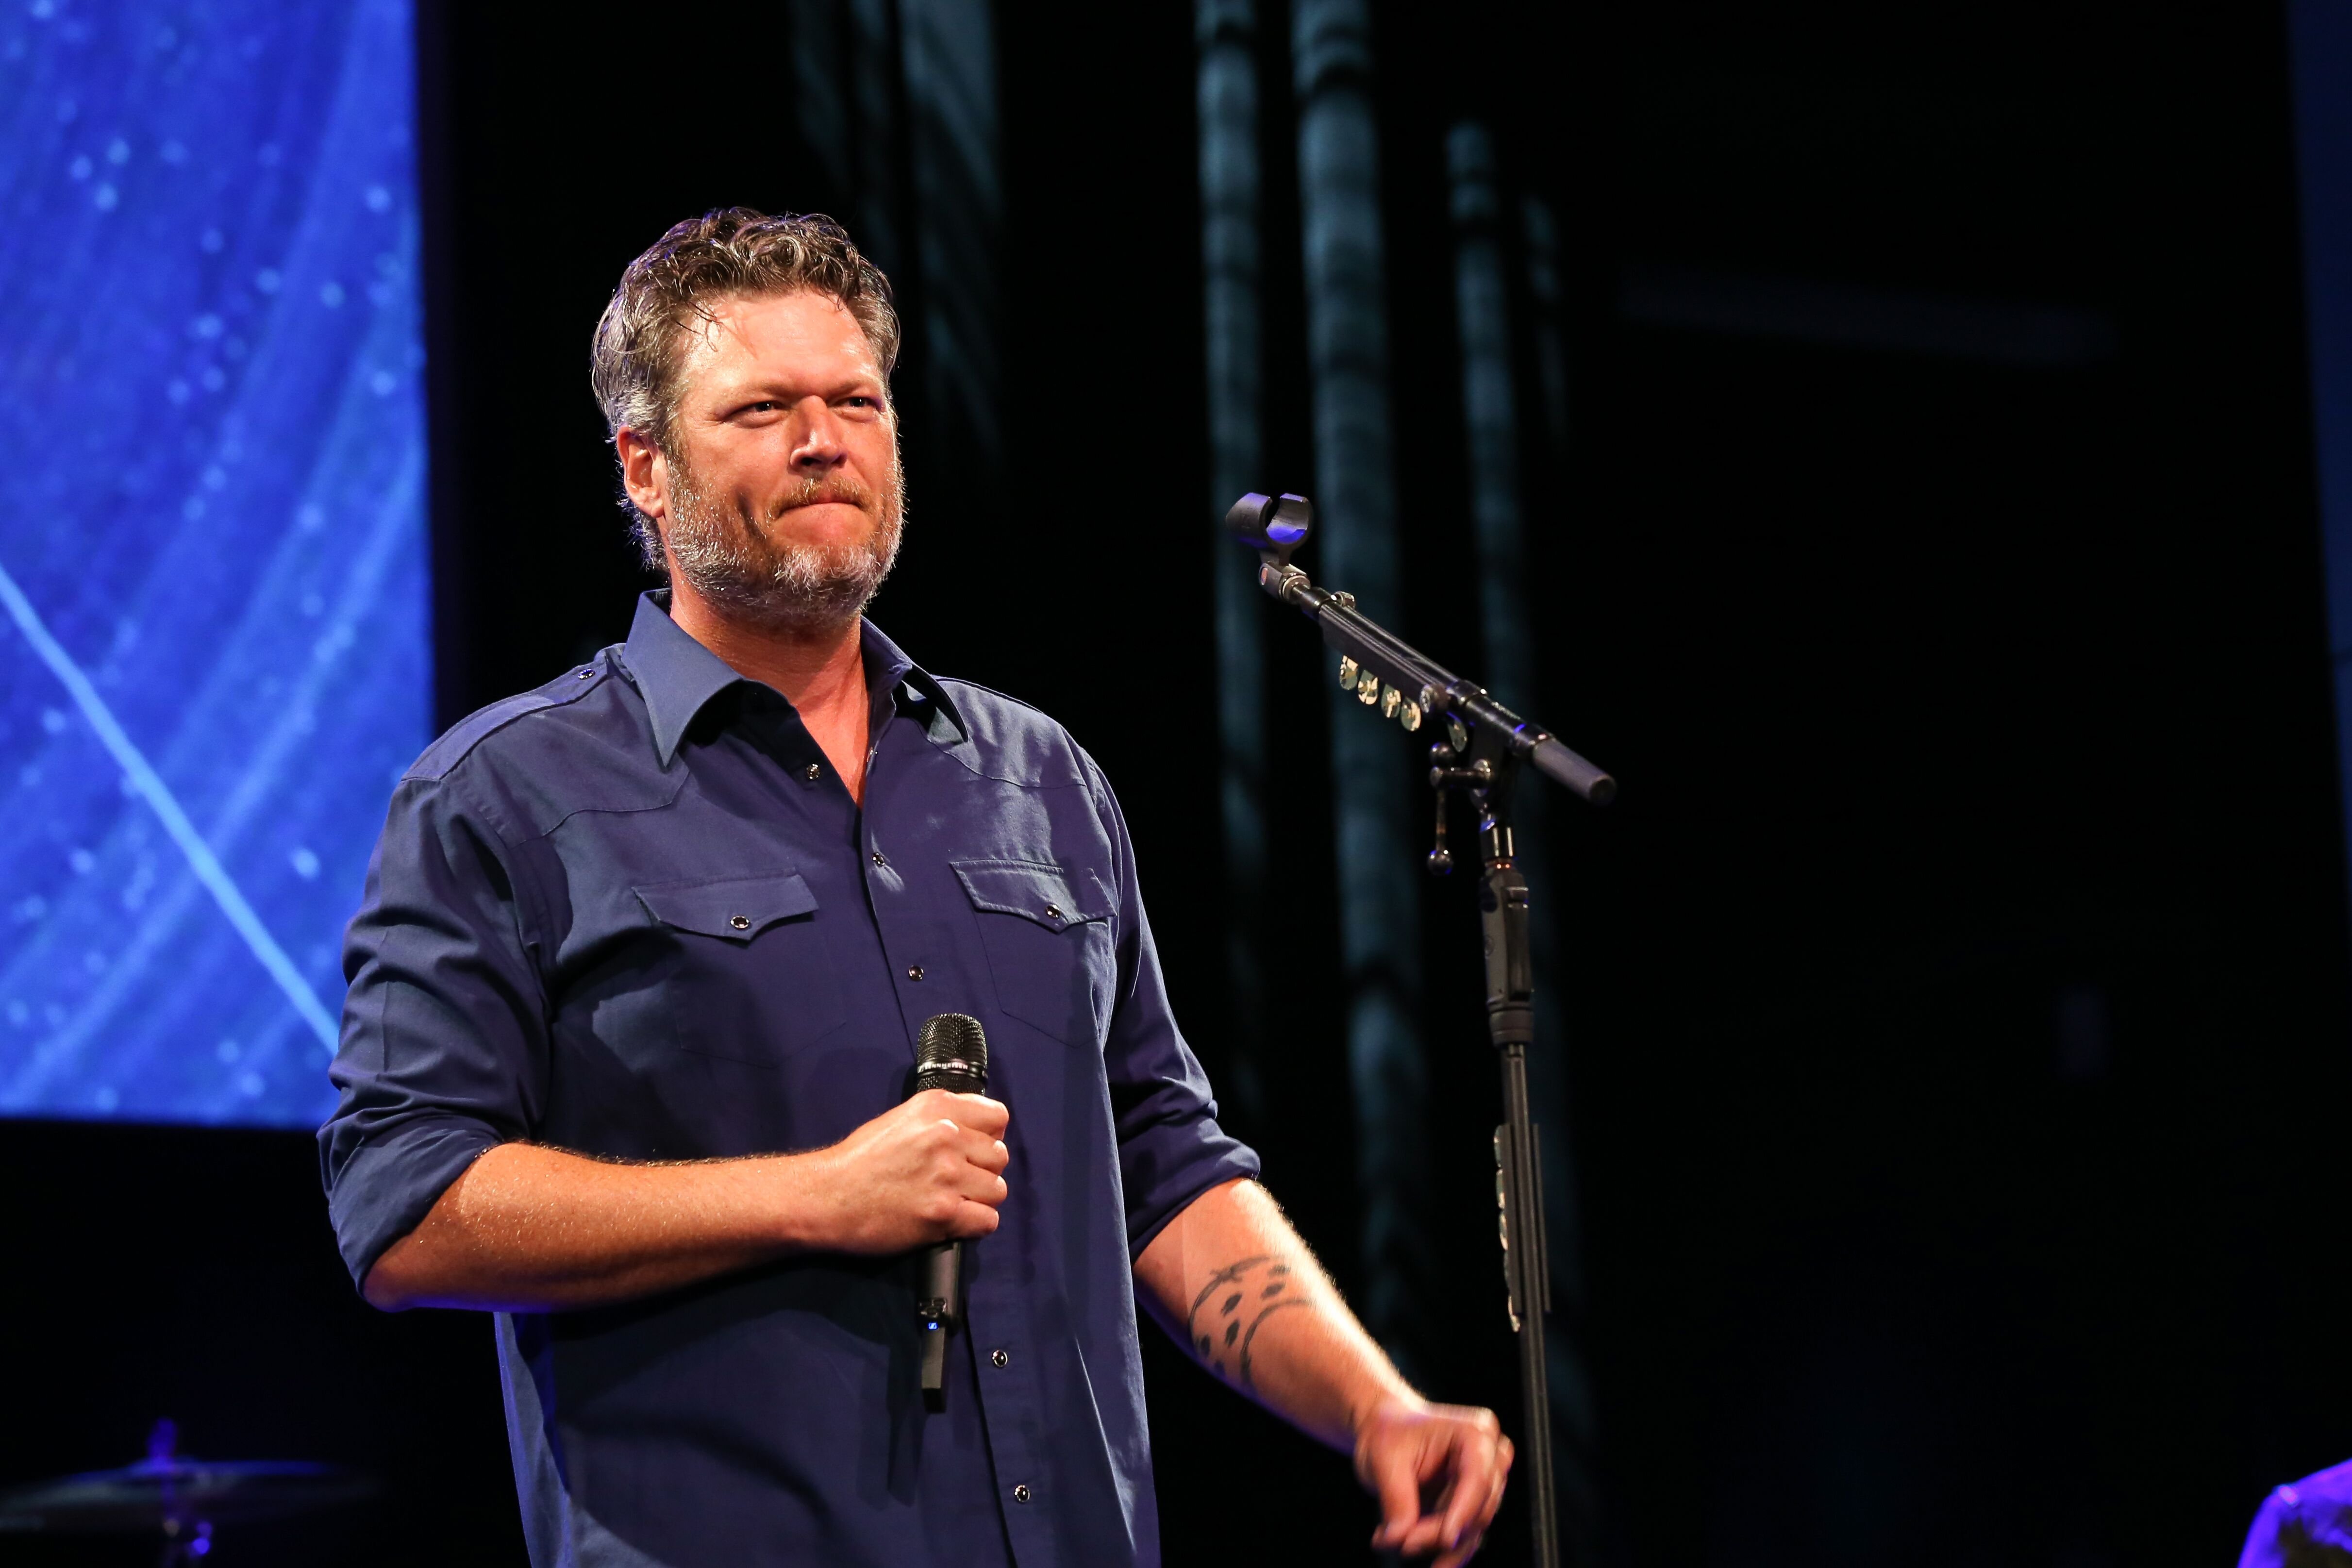 Blake Shelton at the Musicians On Call 20th Anniversary Kickoff Celebration on May 31, 2019, in Nashville, Tennessee | Photo: Getty Images